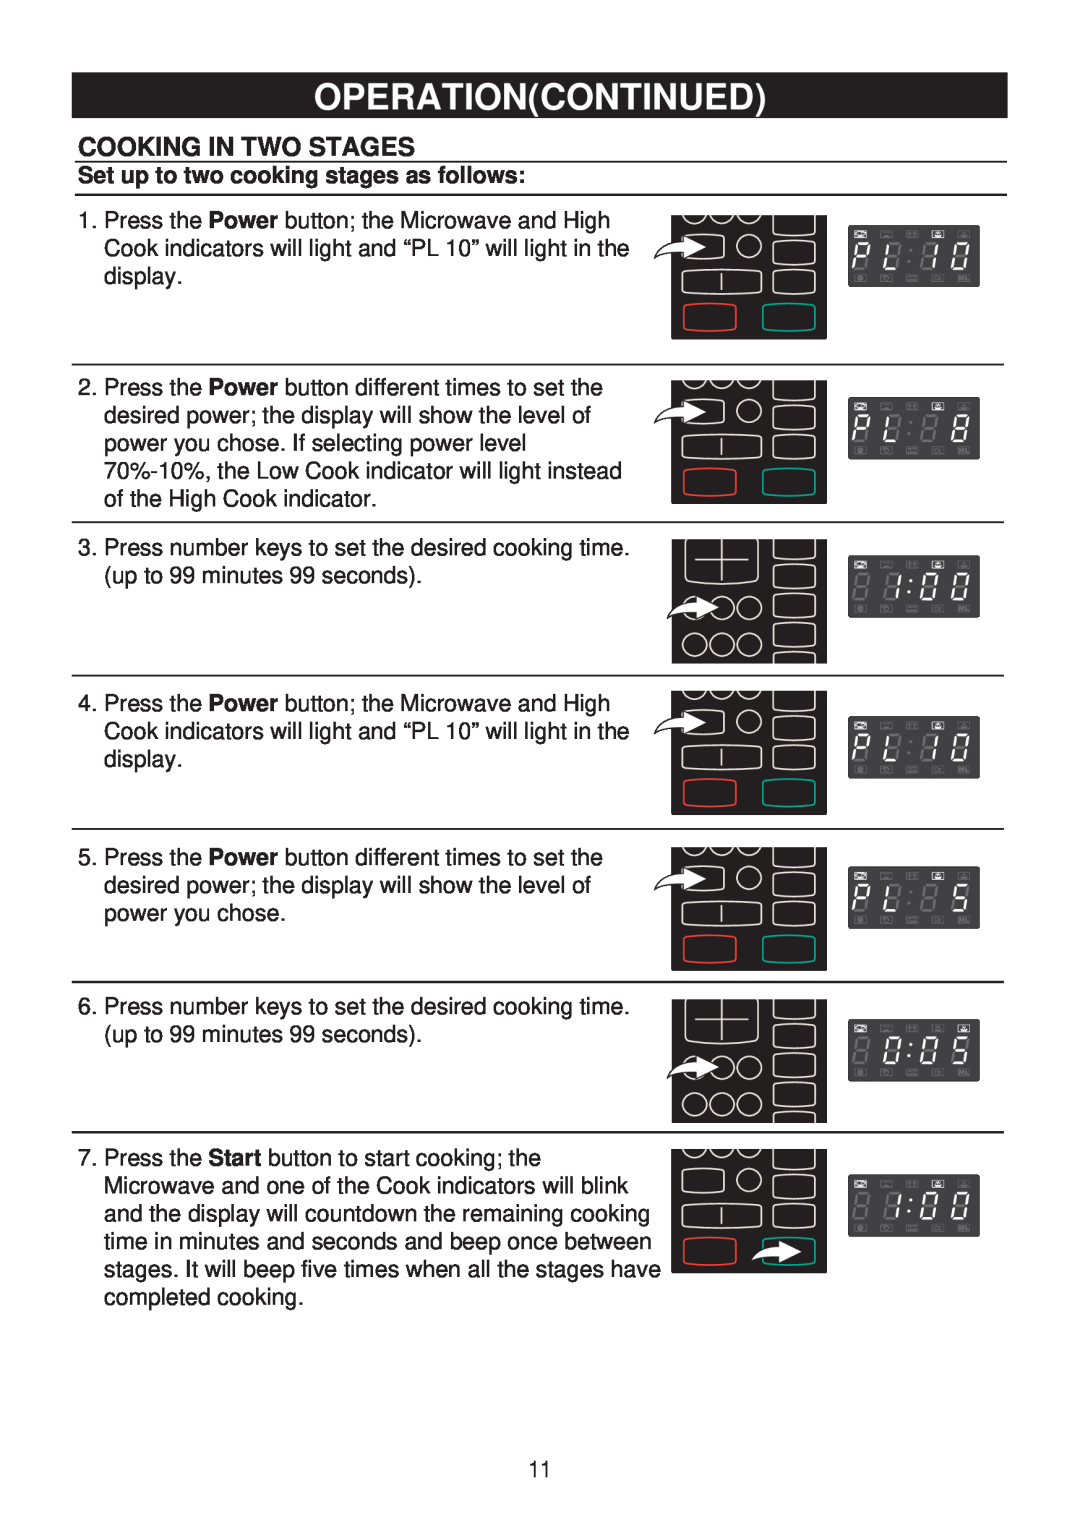 Emerson MW8991SB owner manual Cooking In Two Stages, Set up to two cooking stages as follows, Operationcontinued 